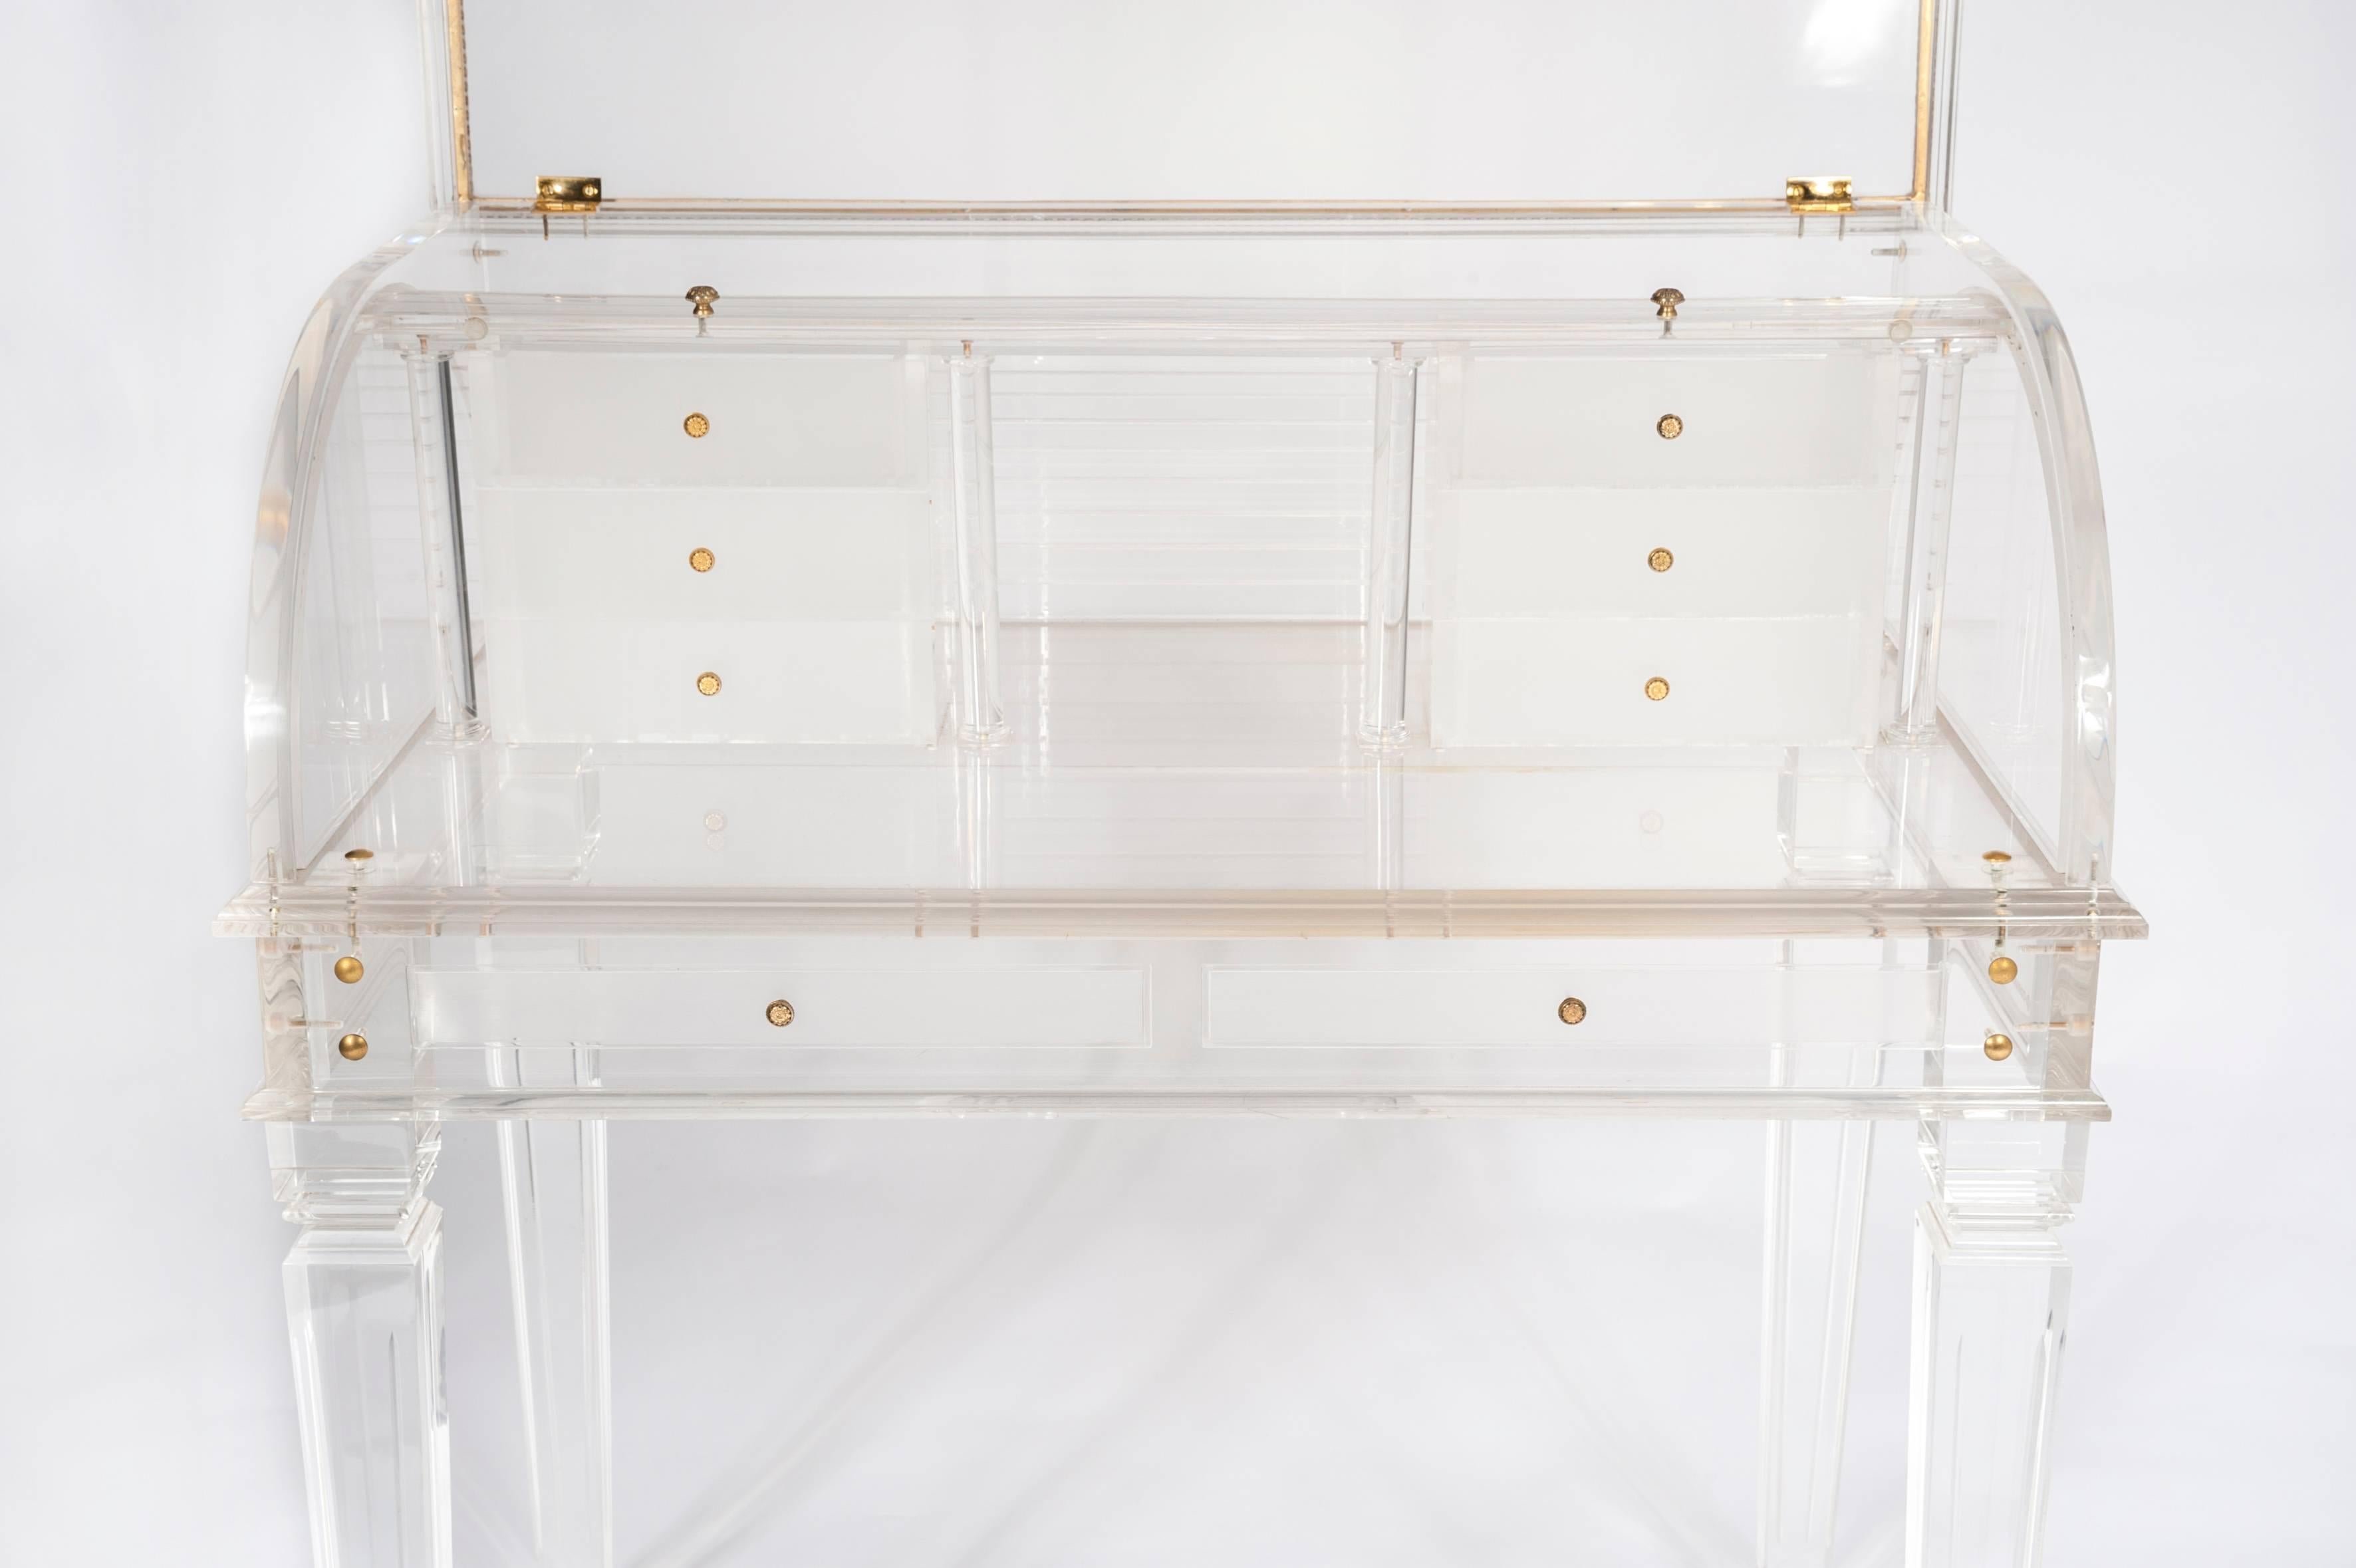 Cylinder Secretary Desk in Lucite Late 1980s Style Louis XVI For Sale 3